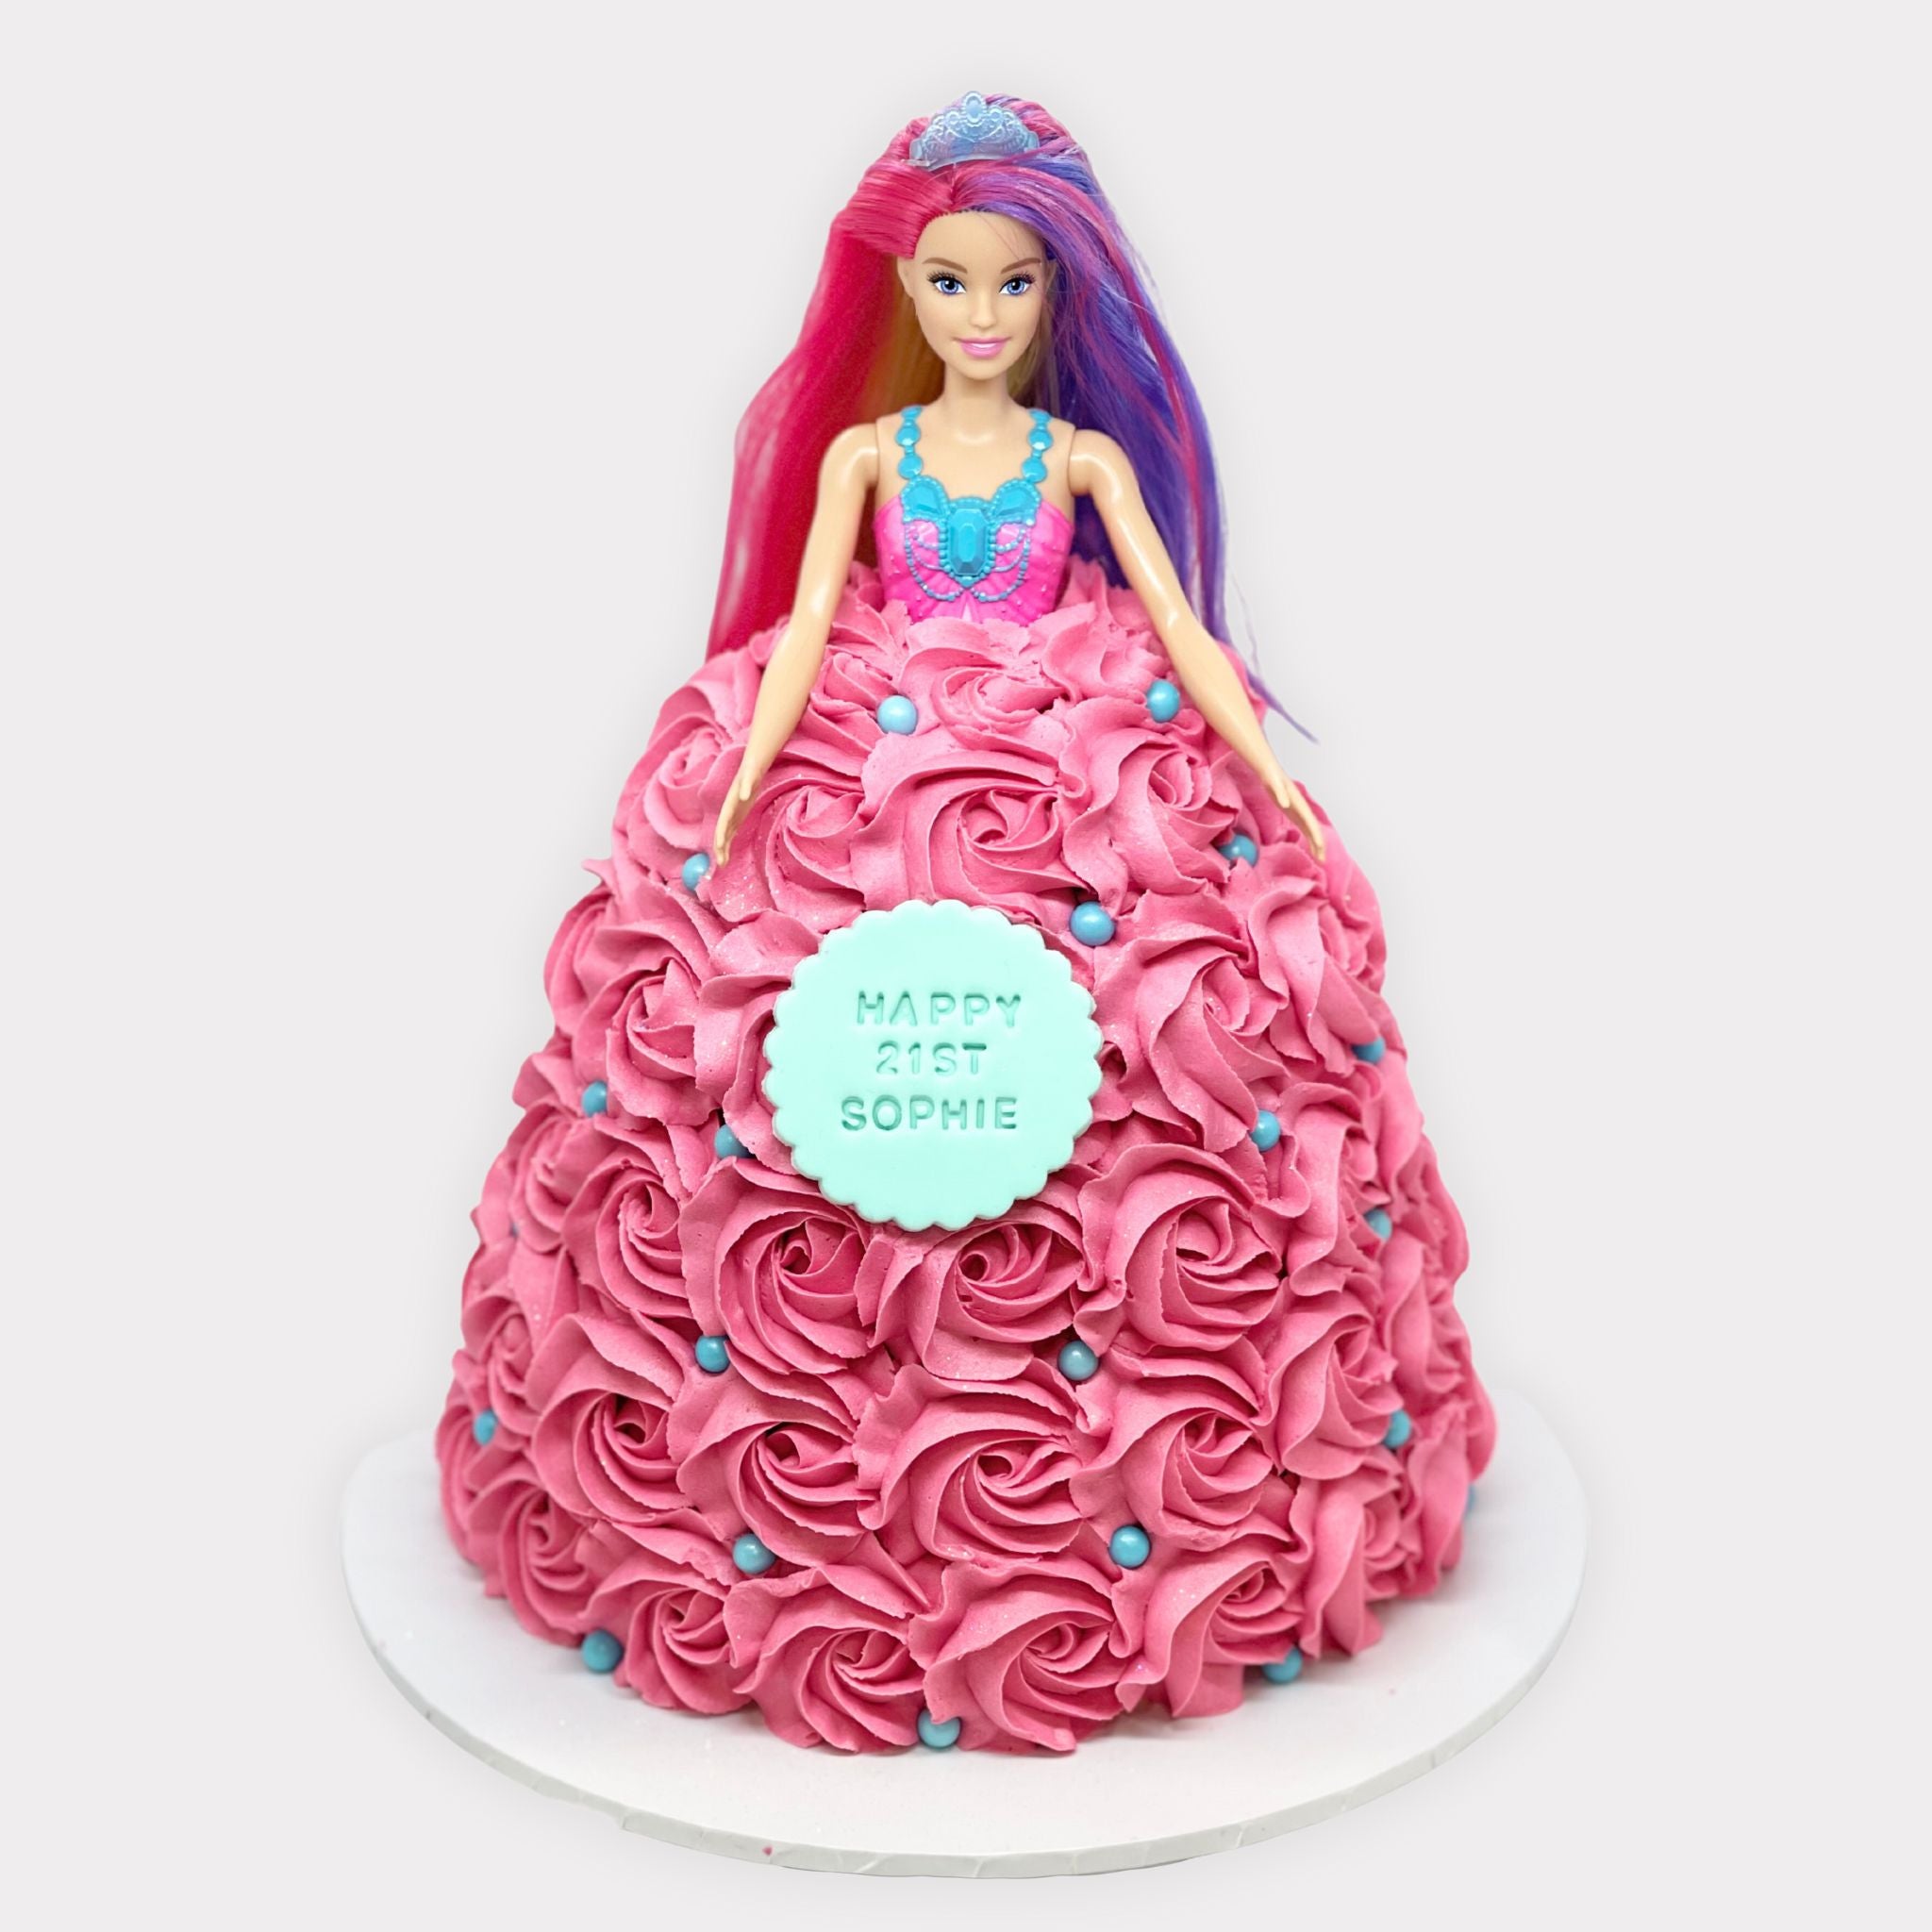 Barbie / Doll Cakes – Cakes and Memories Bakeshop